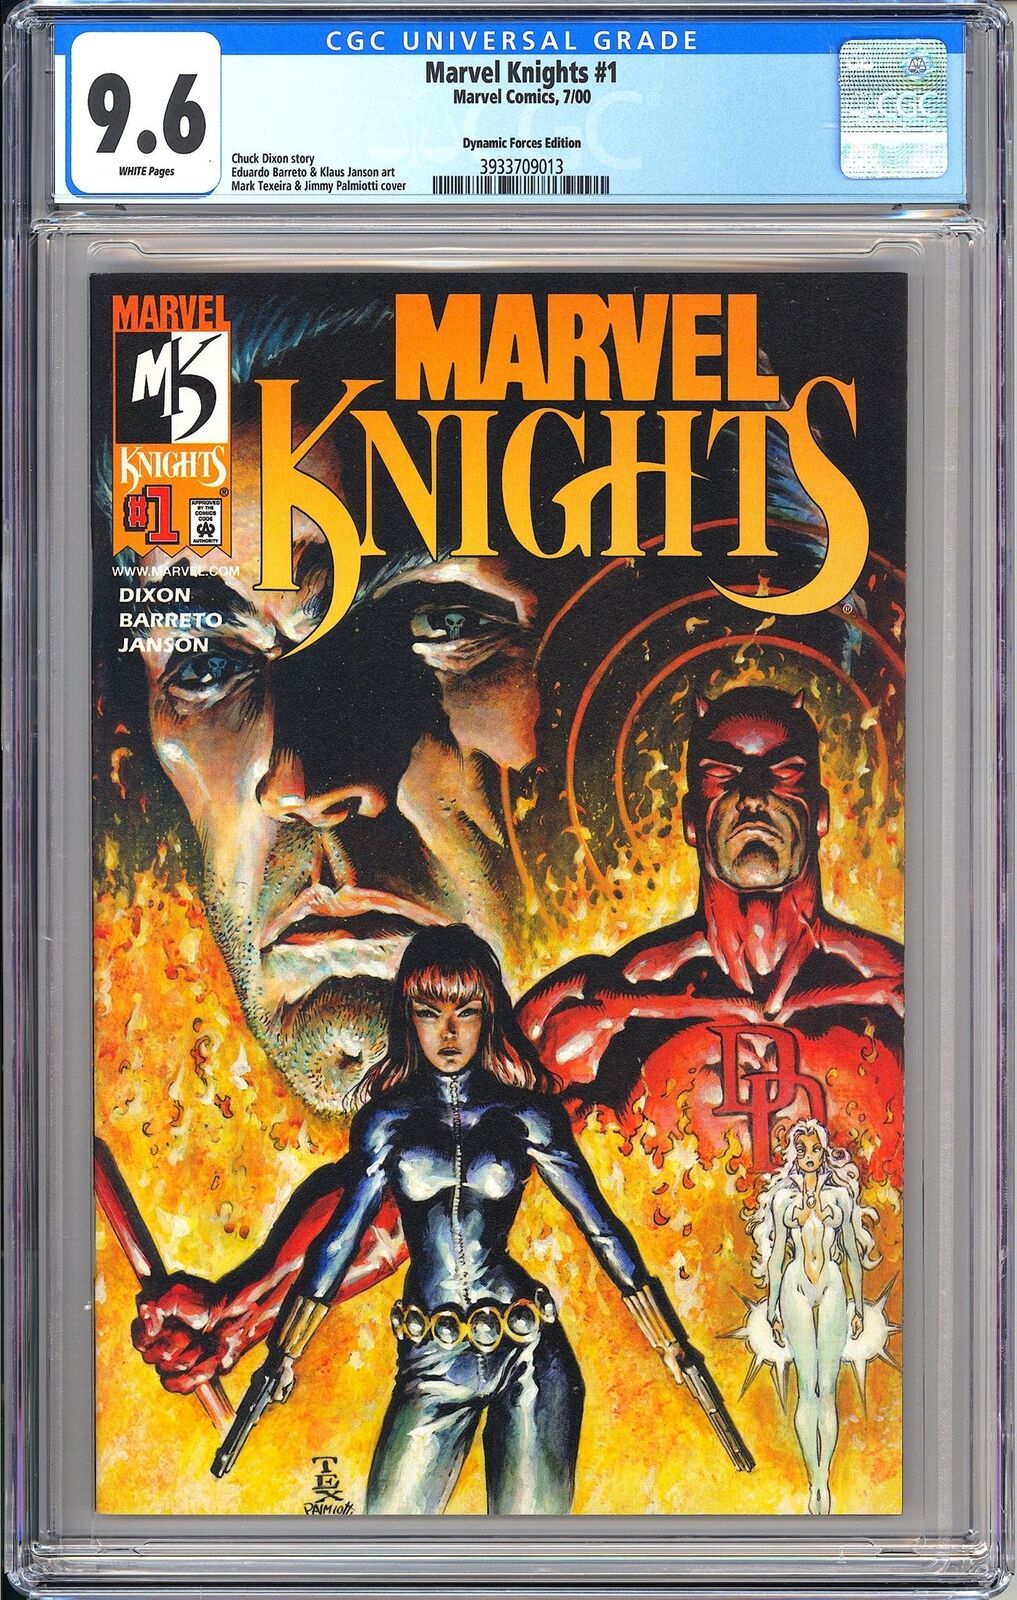 Marvel Knights #1 CGC 9.6 2000 3933709013 Dynamic Forces Variant